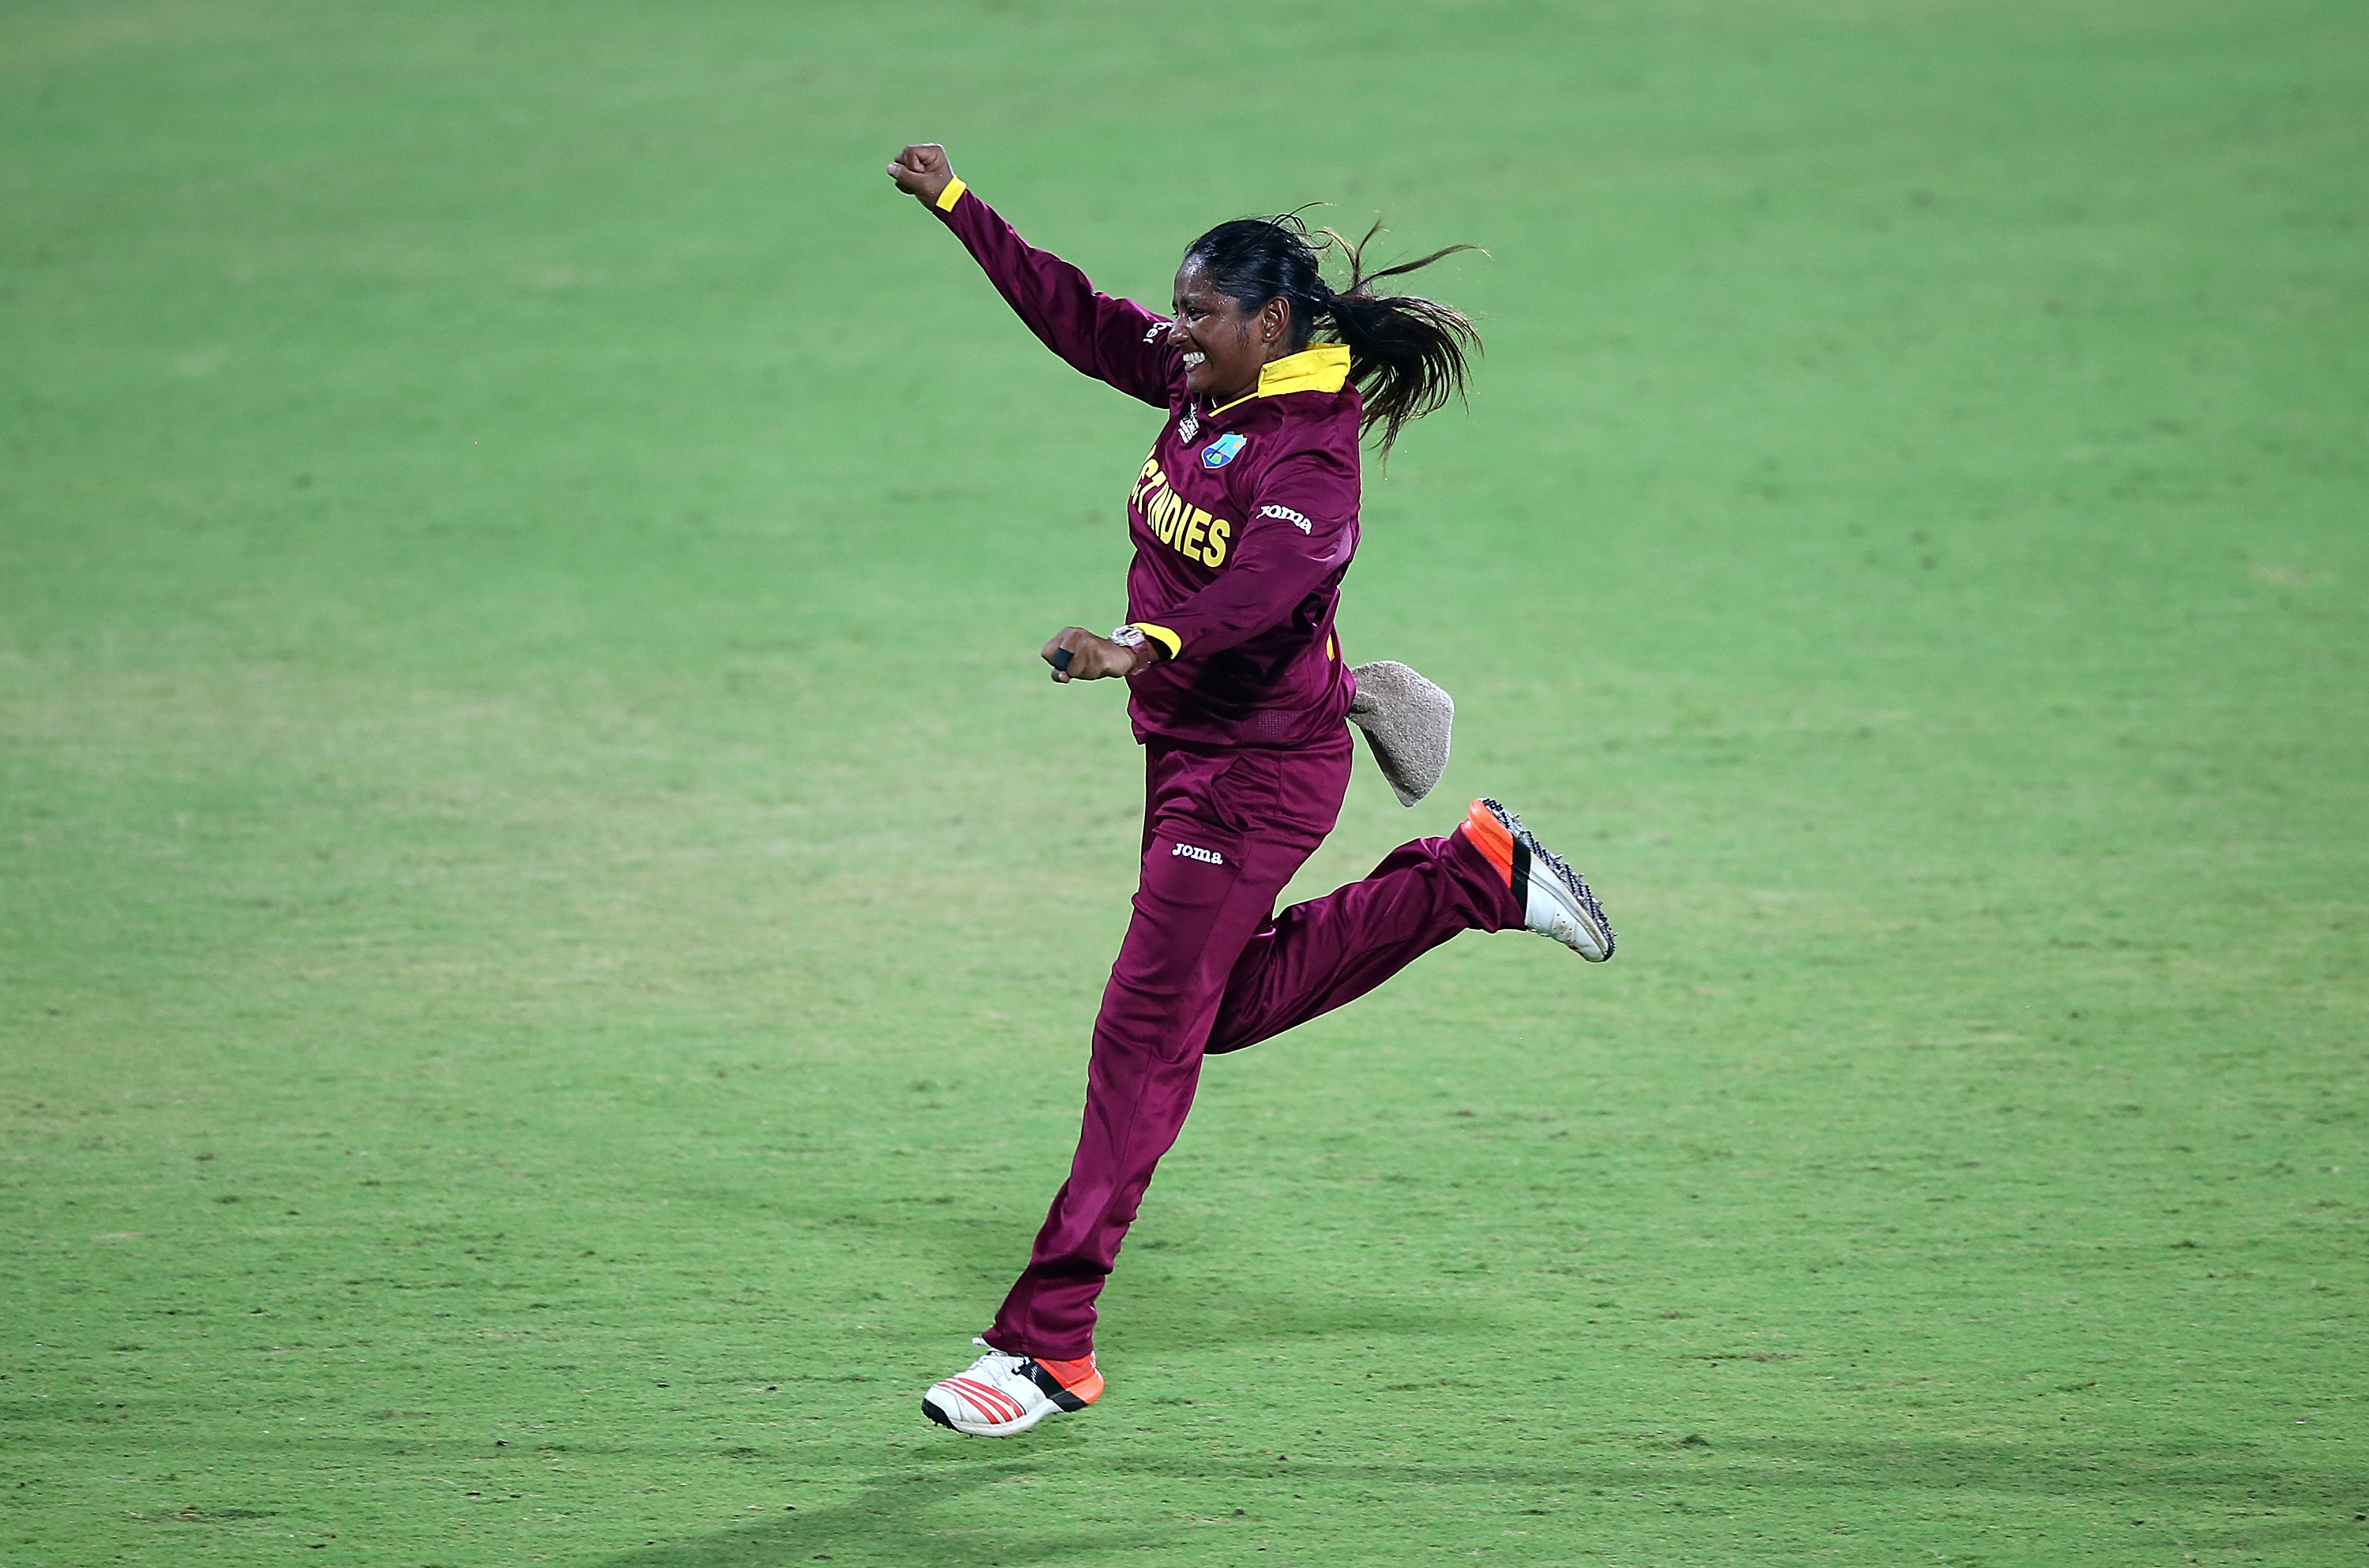 "CHENNAI, INDIA - MARCH 16: Anisa Mohammed of the West Indies celebrates the wicket of Bismah Maroof of Pakistan during the Women's ICC World Twenty20 India 2016 match between West Indies and Pakistan at MA Chidambaram Stadium on March 16, 2016 in Chennai, India. (Photo by Jan Kruger-IDI/IDI via Getty Images)"